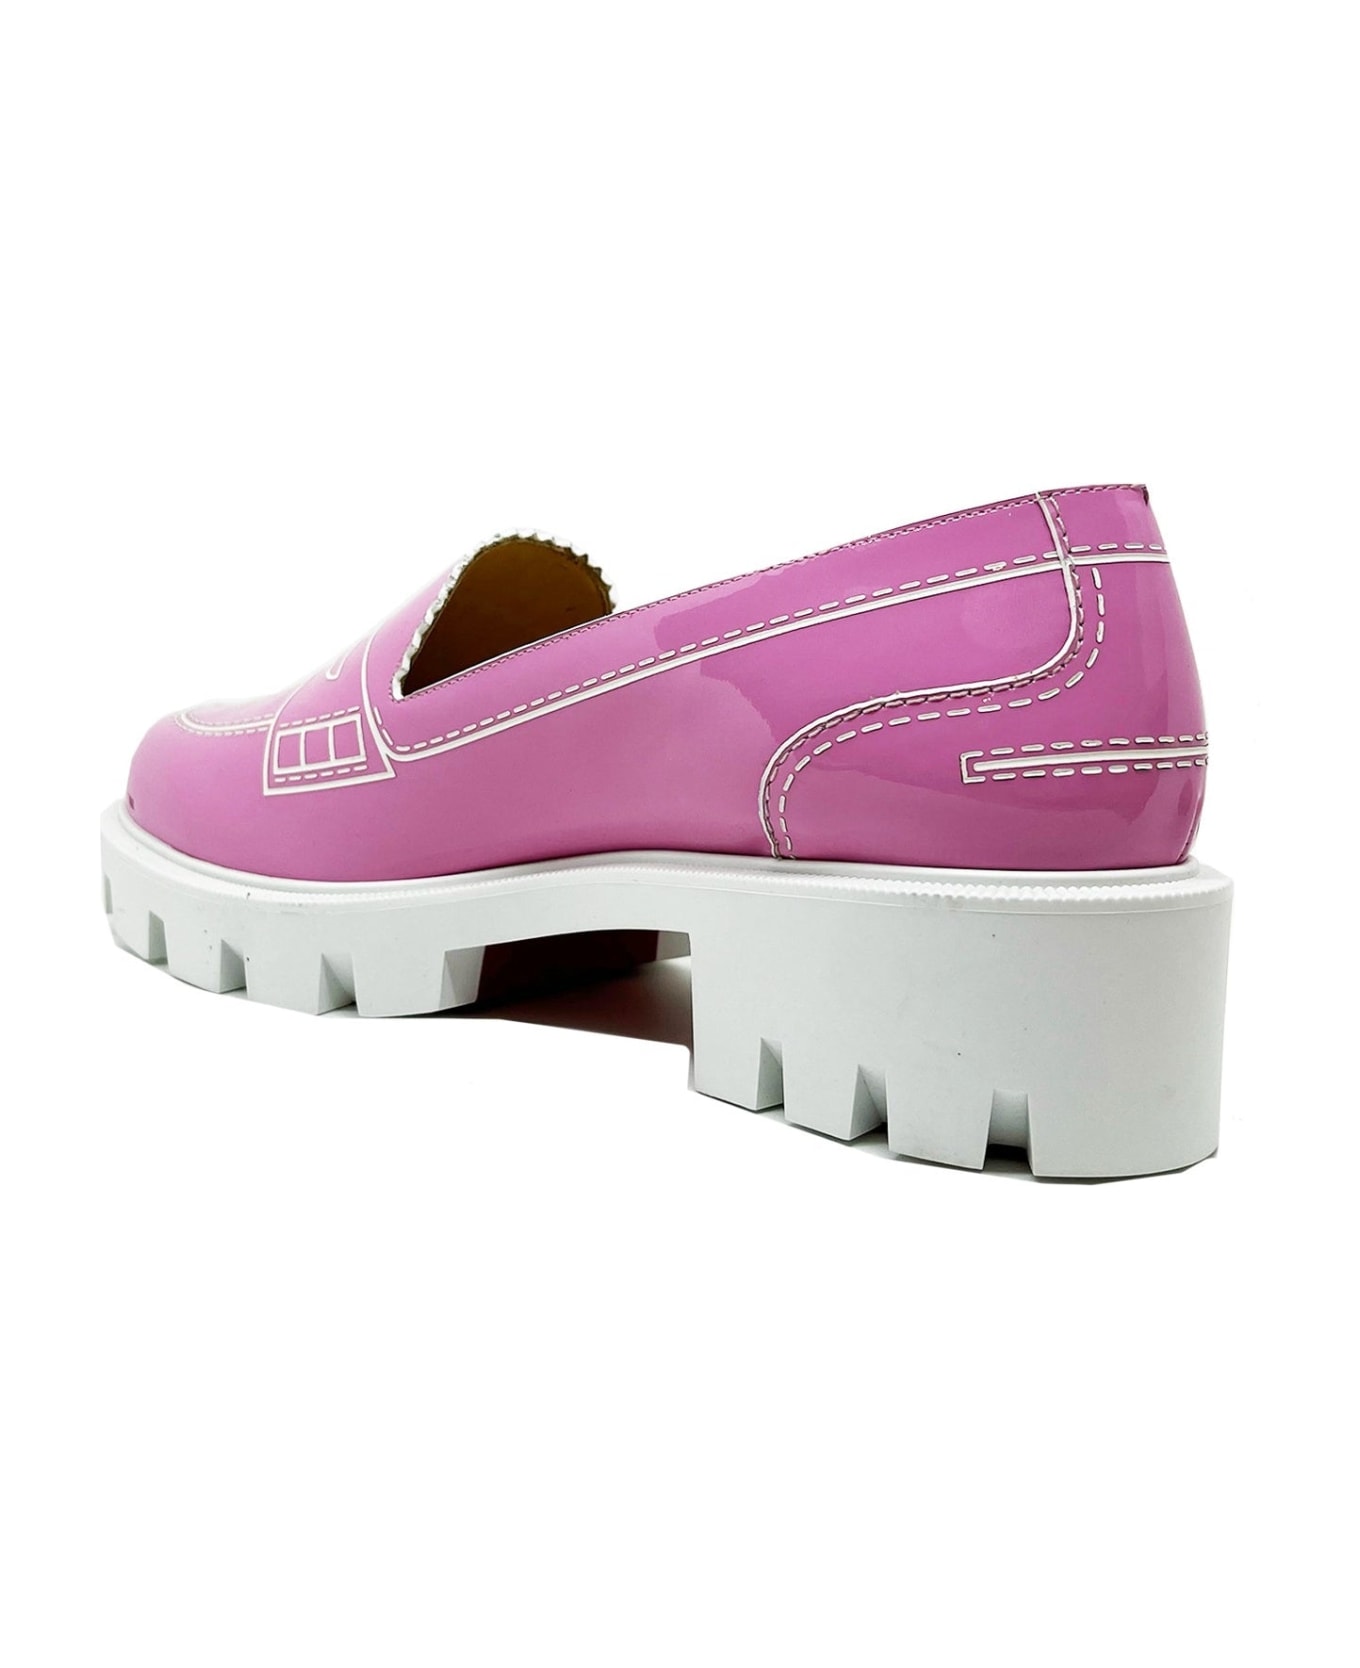 Christian Louboutin Leather Loafers - Pink フラットシューズ